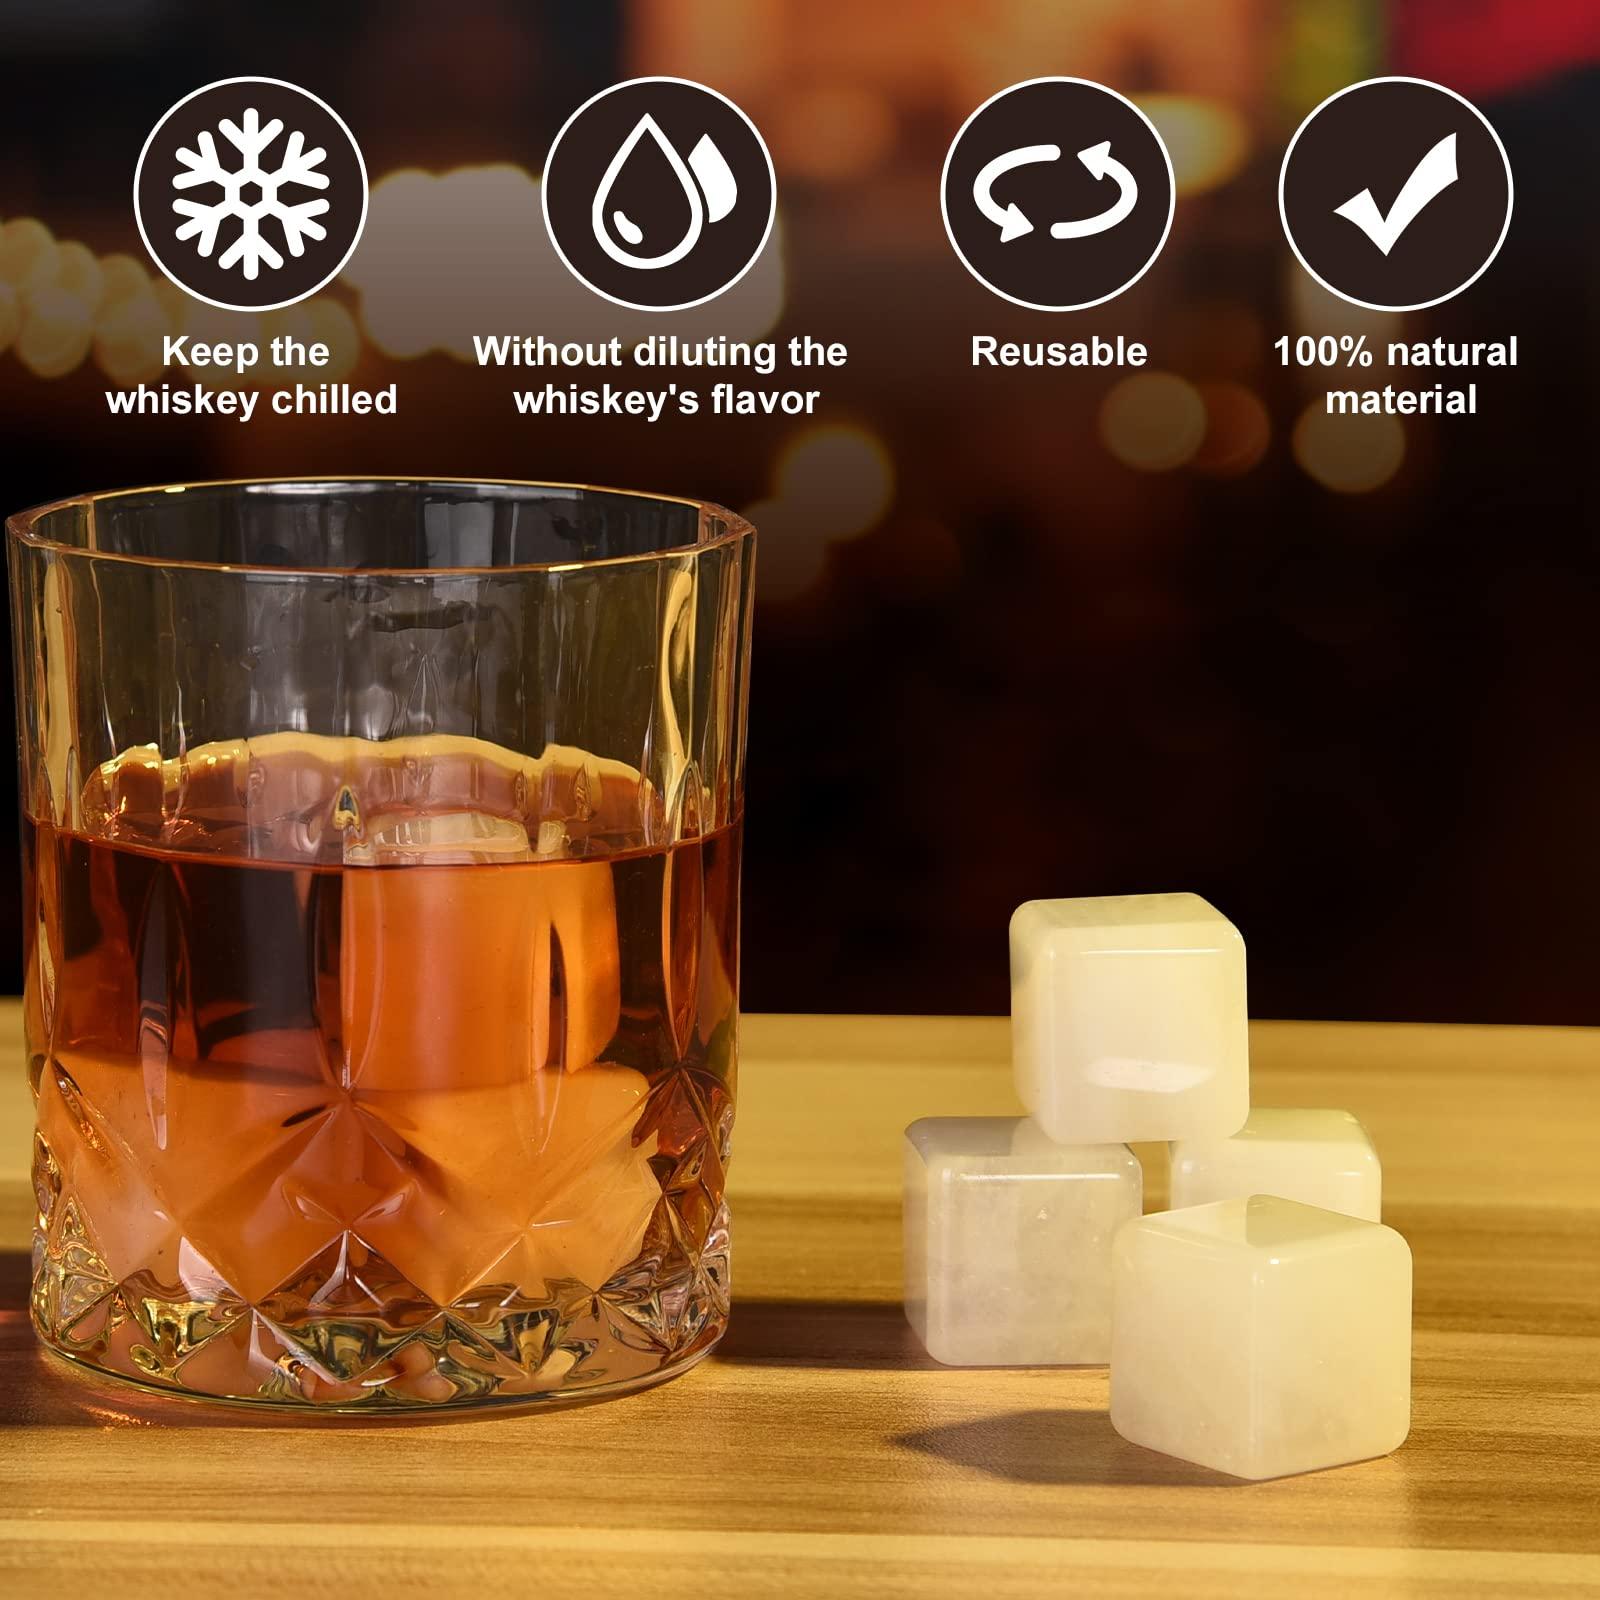 EooCoo 8pcs Marble Whisky Stones Gift Set for Men, Premium Wooden Box with Glasses,Two-Color Design Suitable for Couples/Friends, Easy Storage, for Anniversary Birthday Wedding Housewarming 2